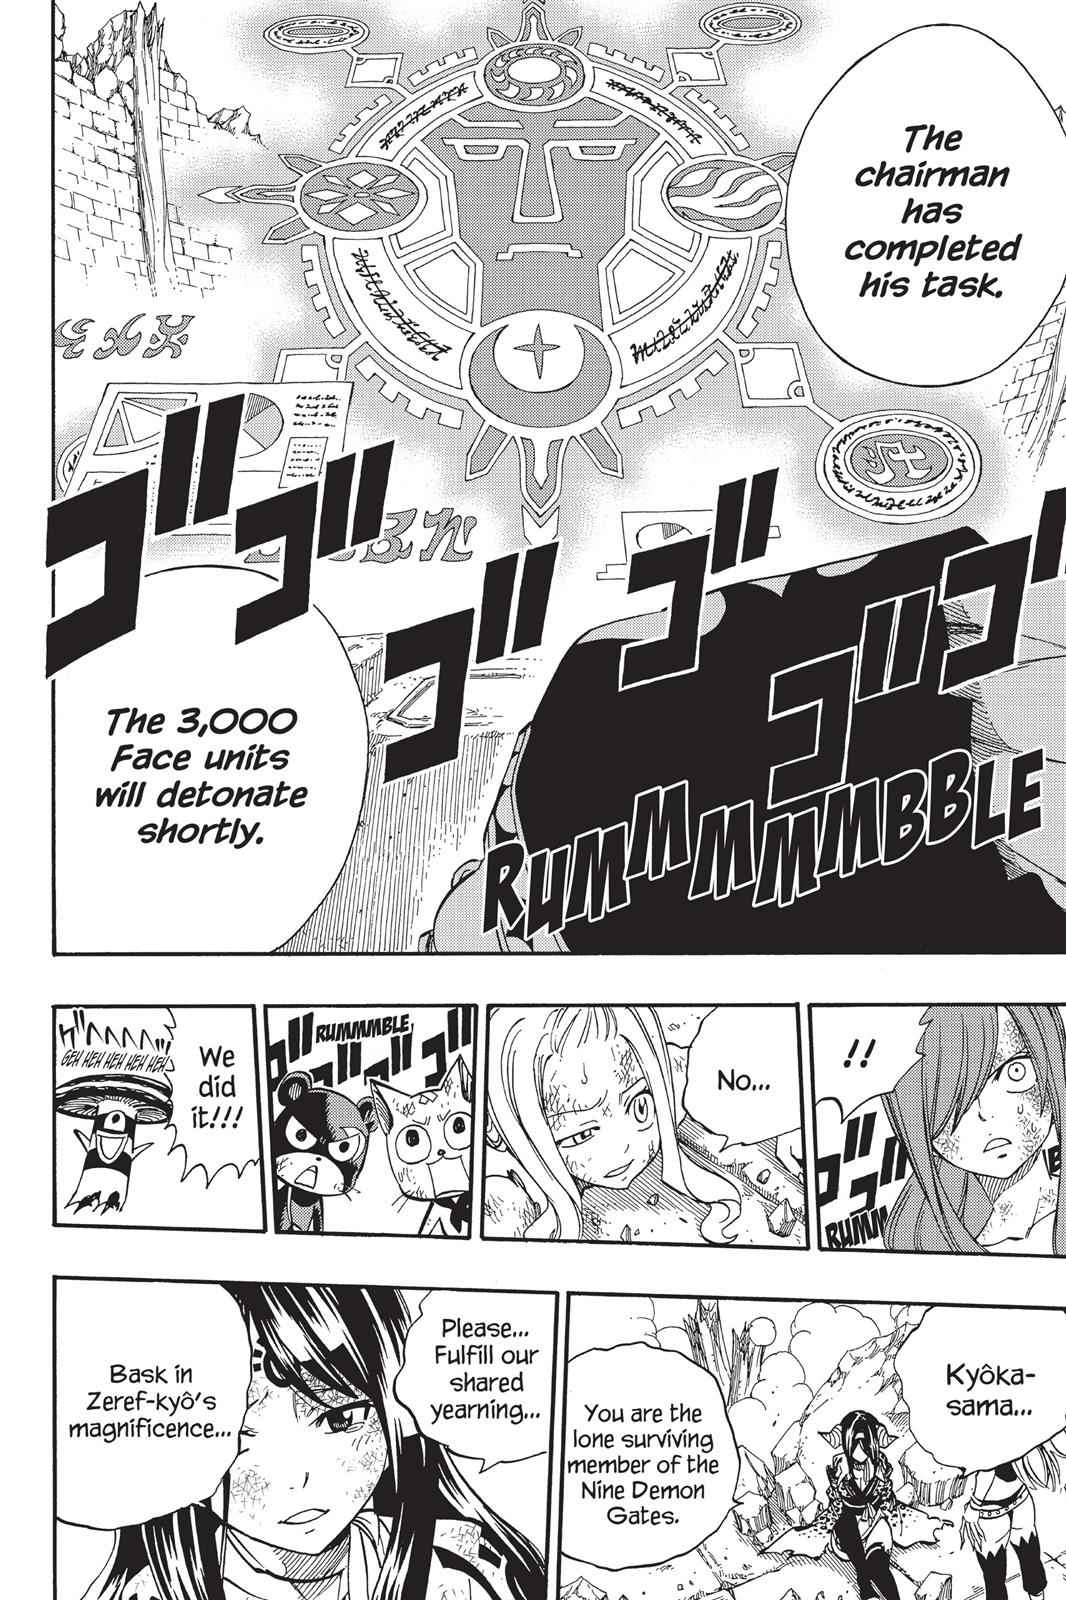  Chapter 398 image 017